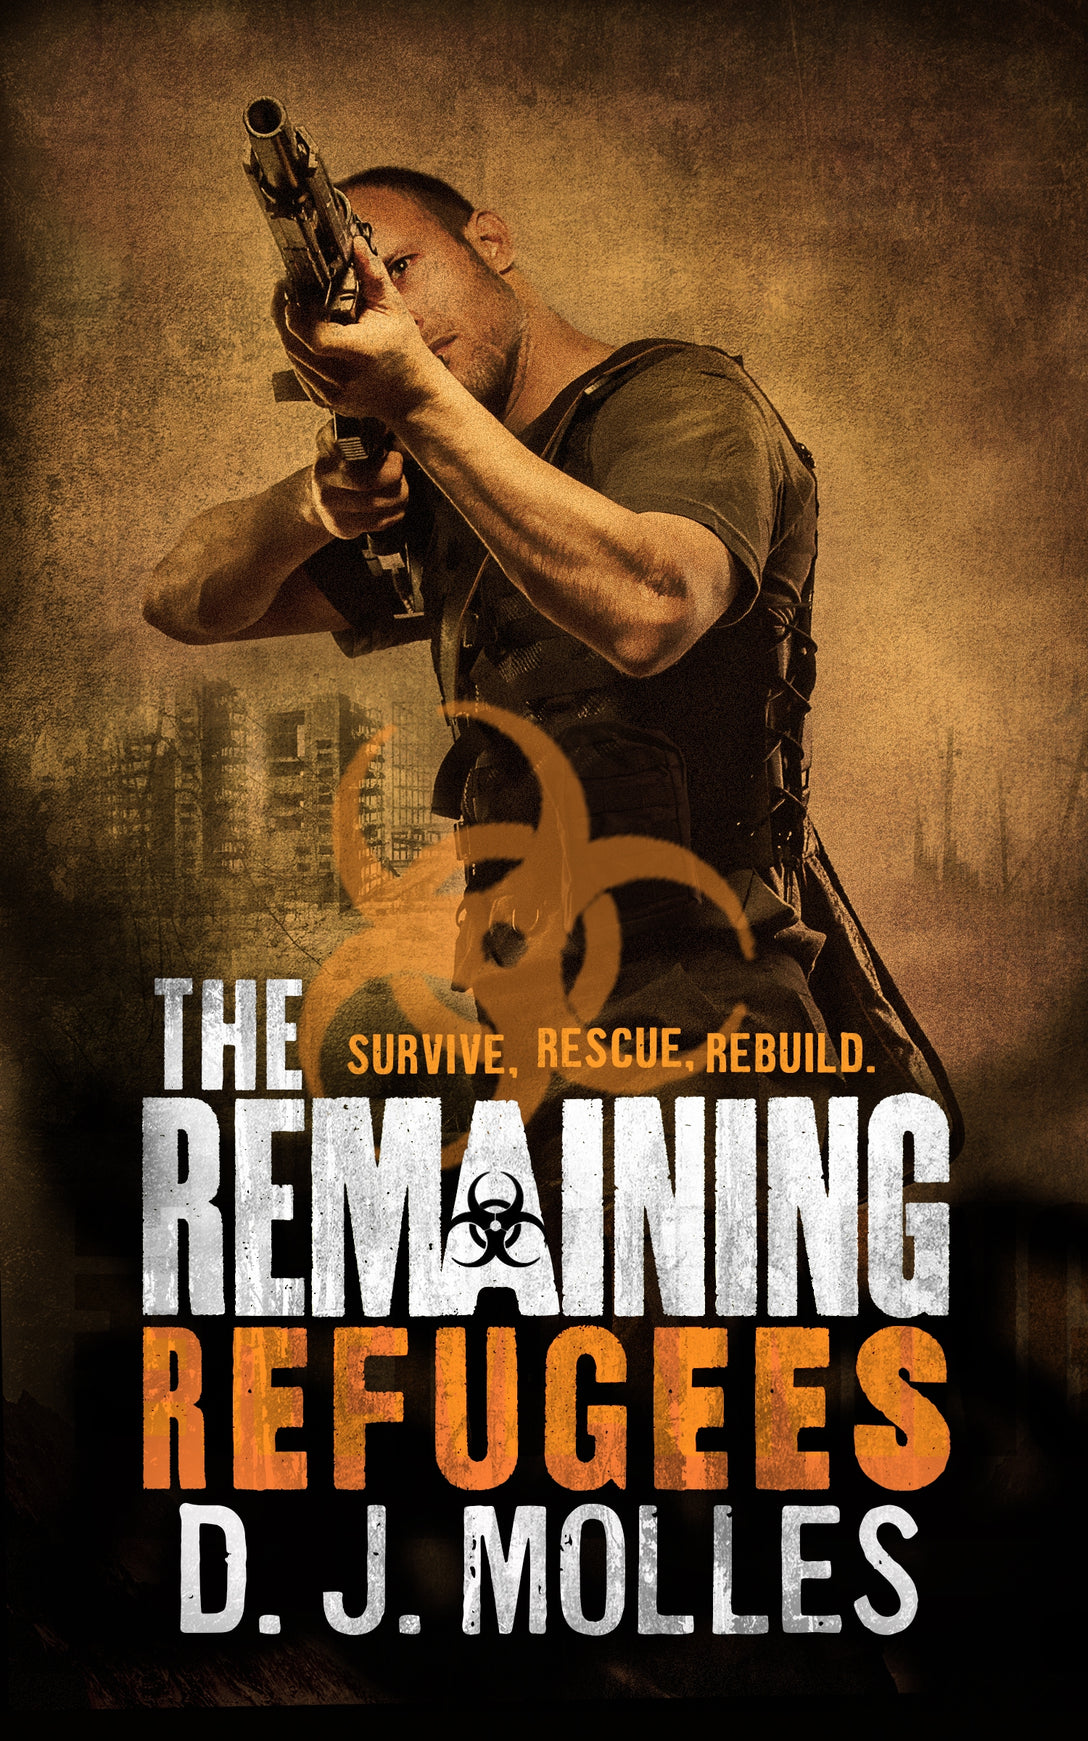 The Remaining: Refugees by D. J. Molles